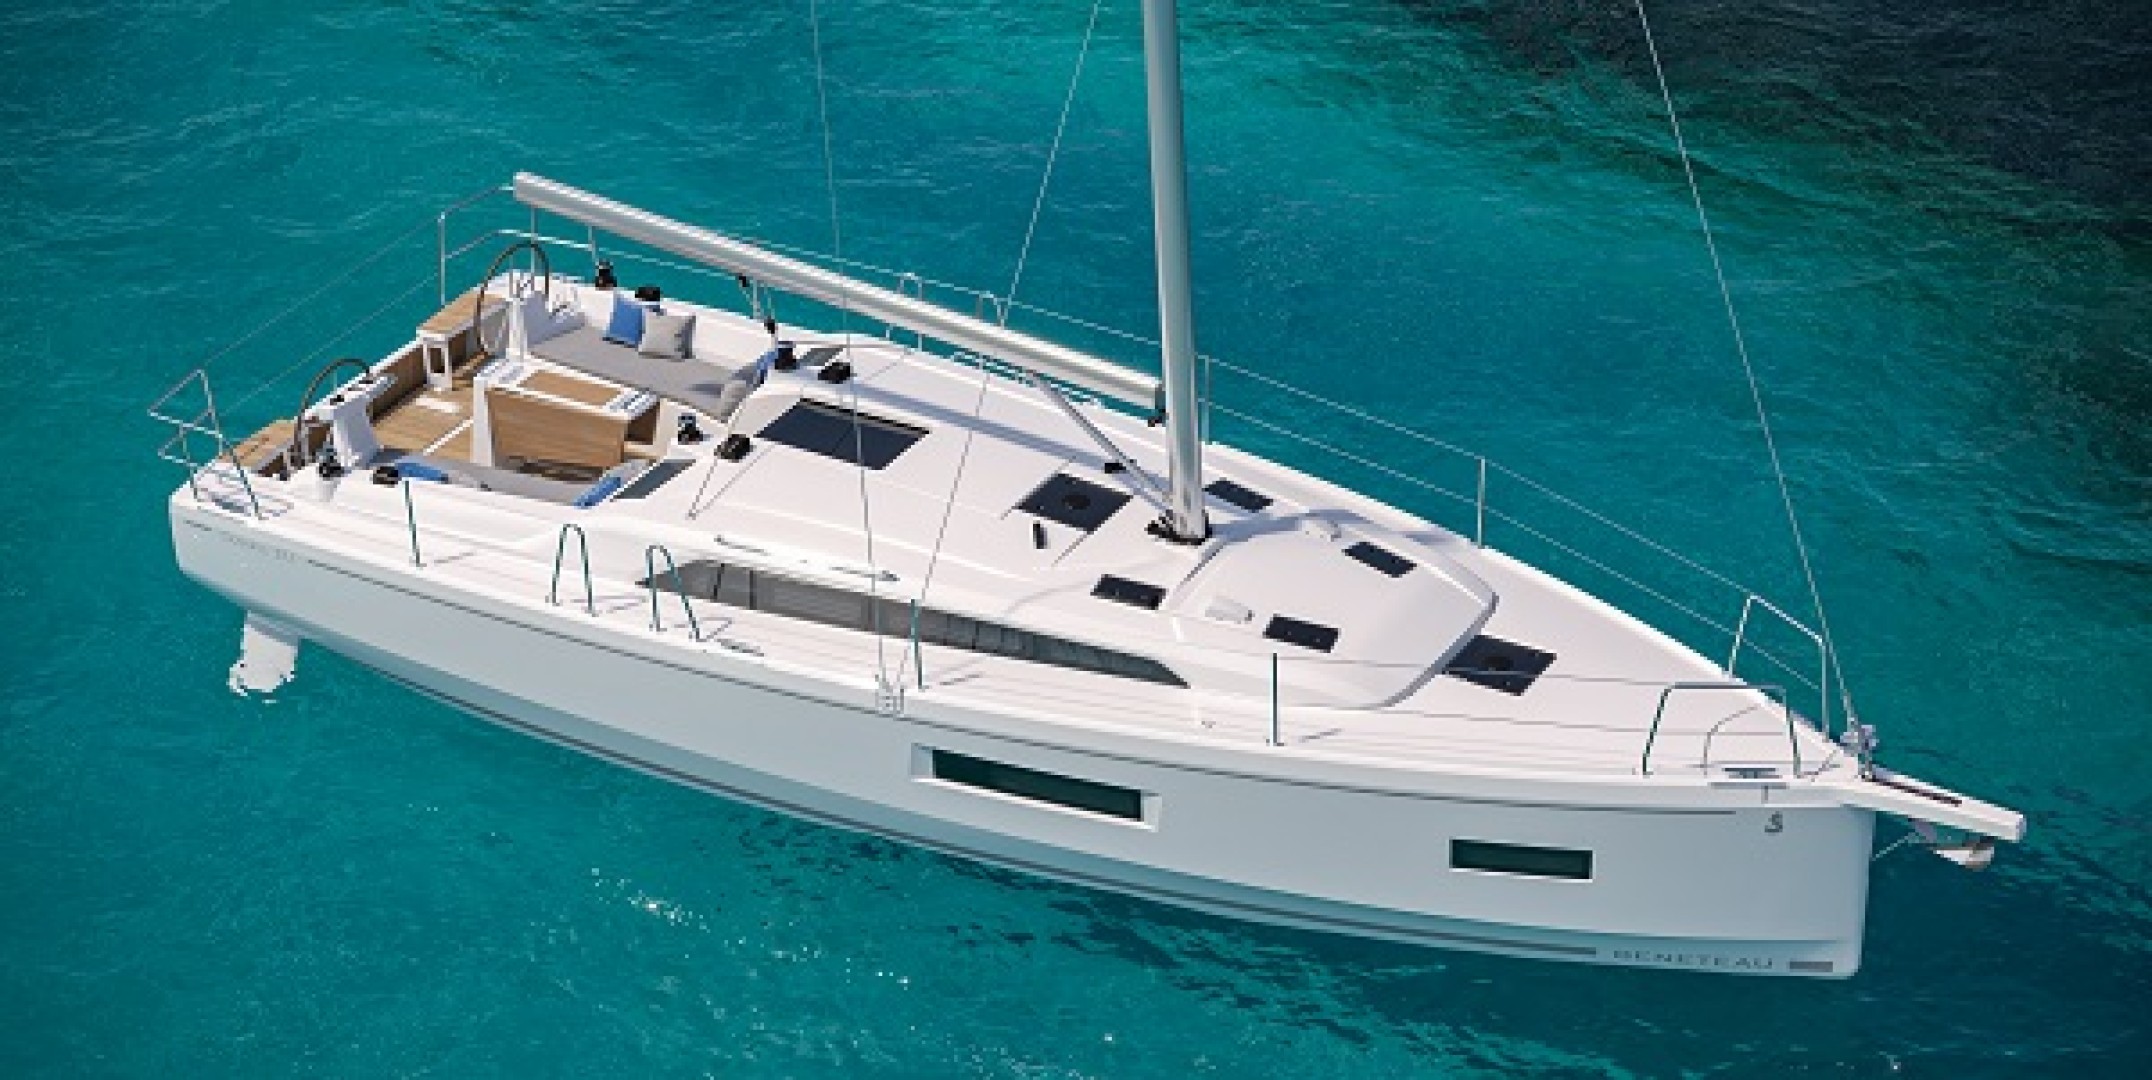 Oceanis 37.1, the eighth model launched by Beneteau